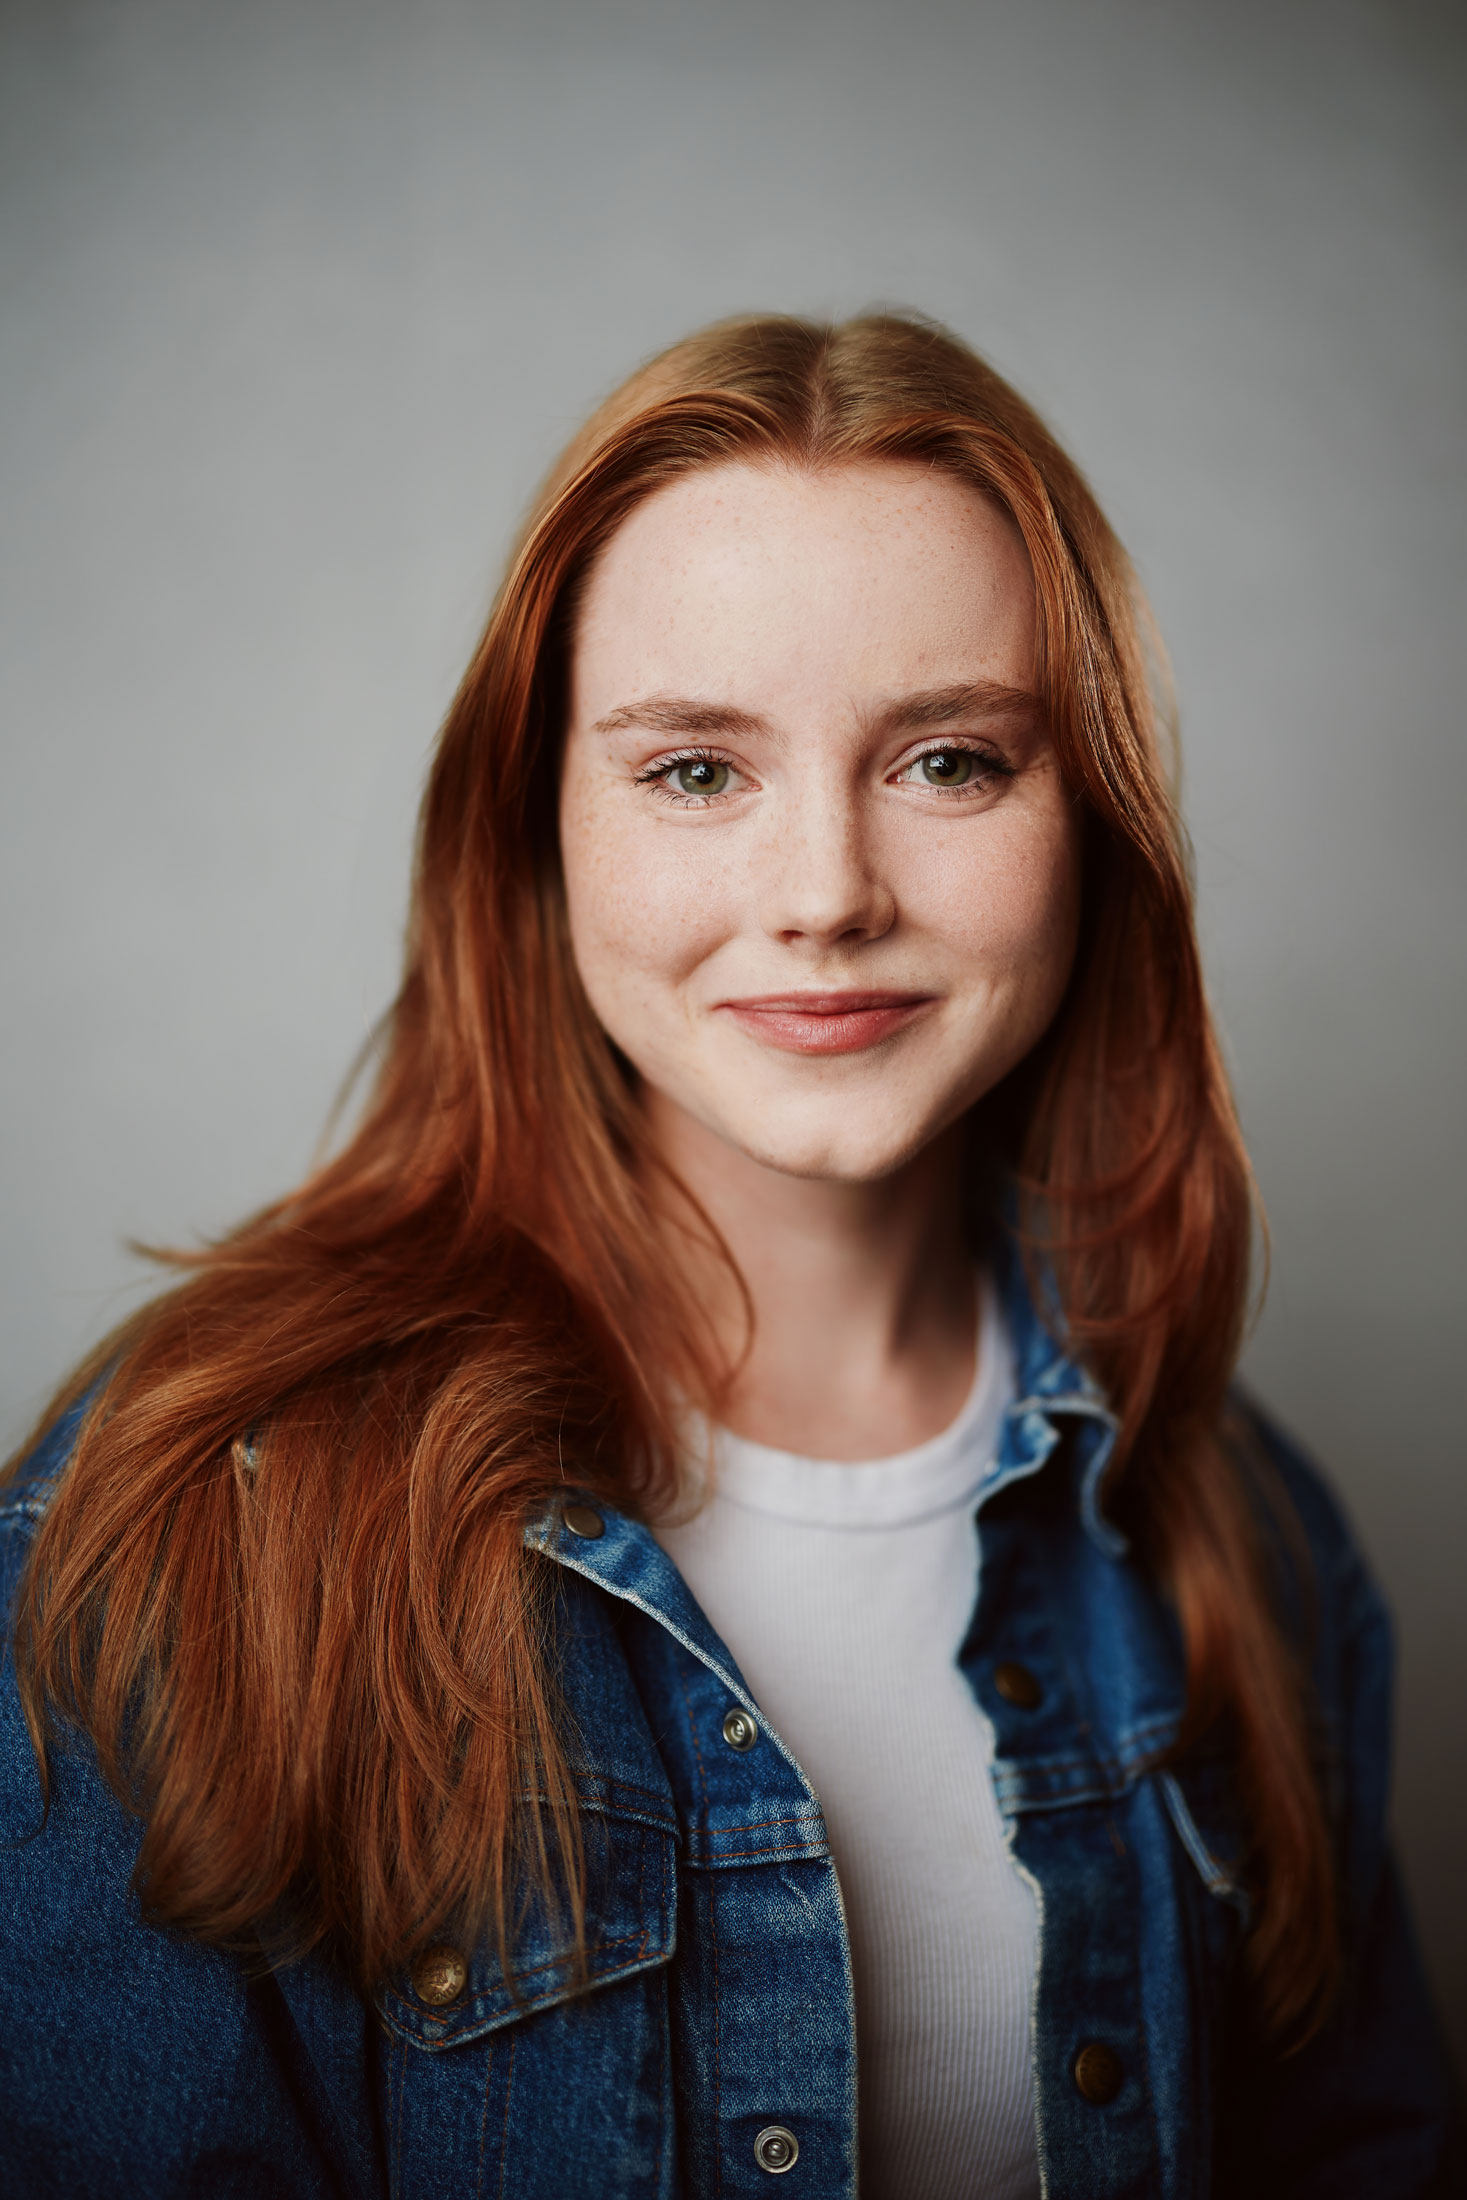 Olivia smiles with a closed mouth. She wears a jean jacket and her red hair is parted in the middle and falls in front of her shoulders.